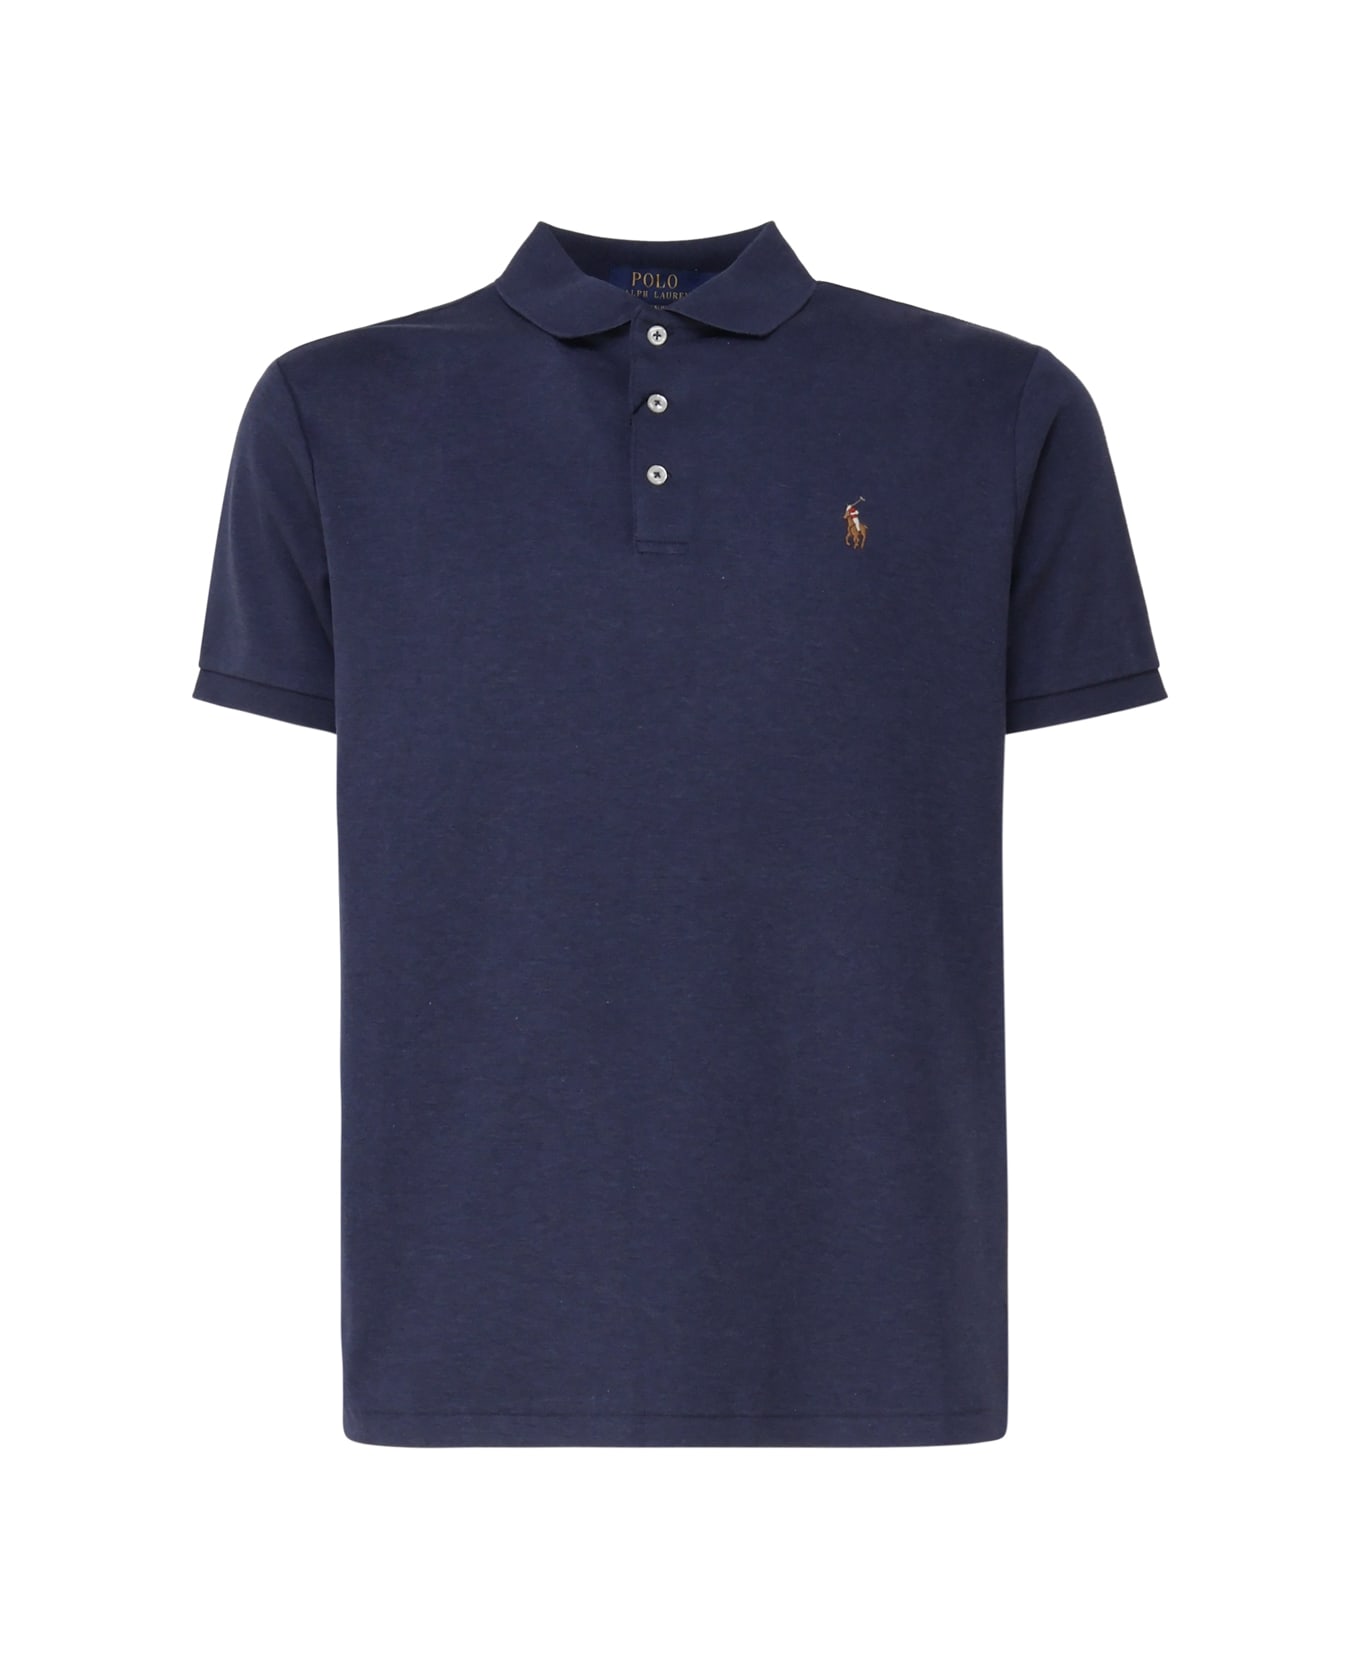 Polo Ralph Lauren Polo Shirt With Embroidery - Blue ポロシャツ